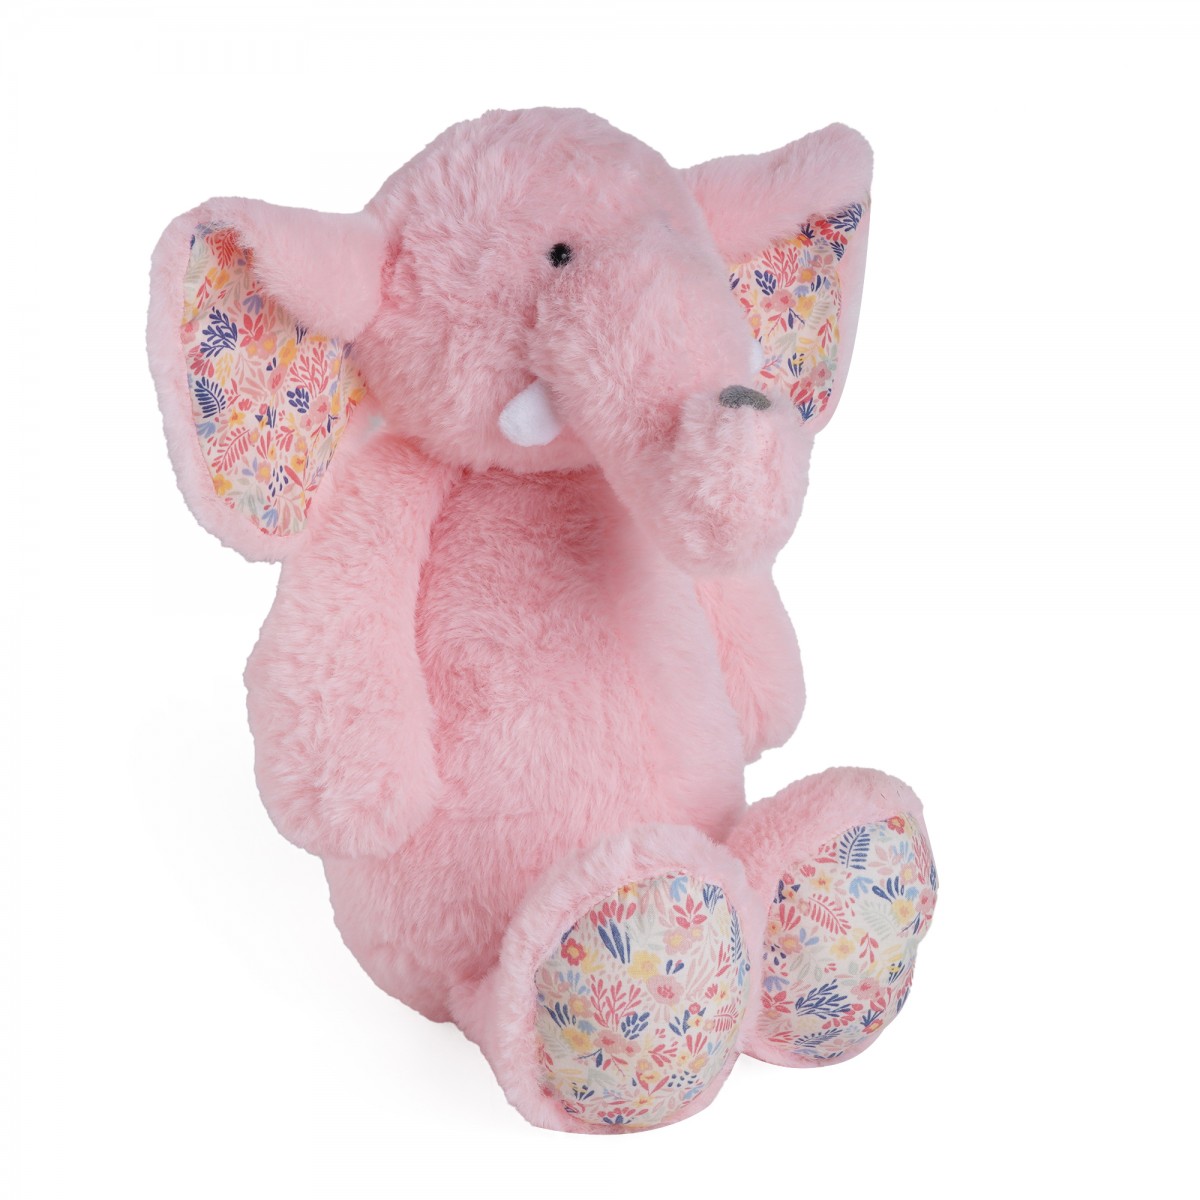 Huggable Cuddly Zany Elephant Stuffed Toy By Fuzzbuzz, Soft Toys for Kids, Cute Plushies Pink, For Kids Of Age 2 Years & Above